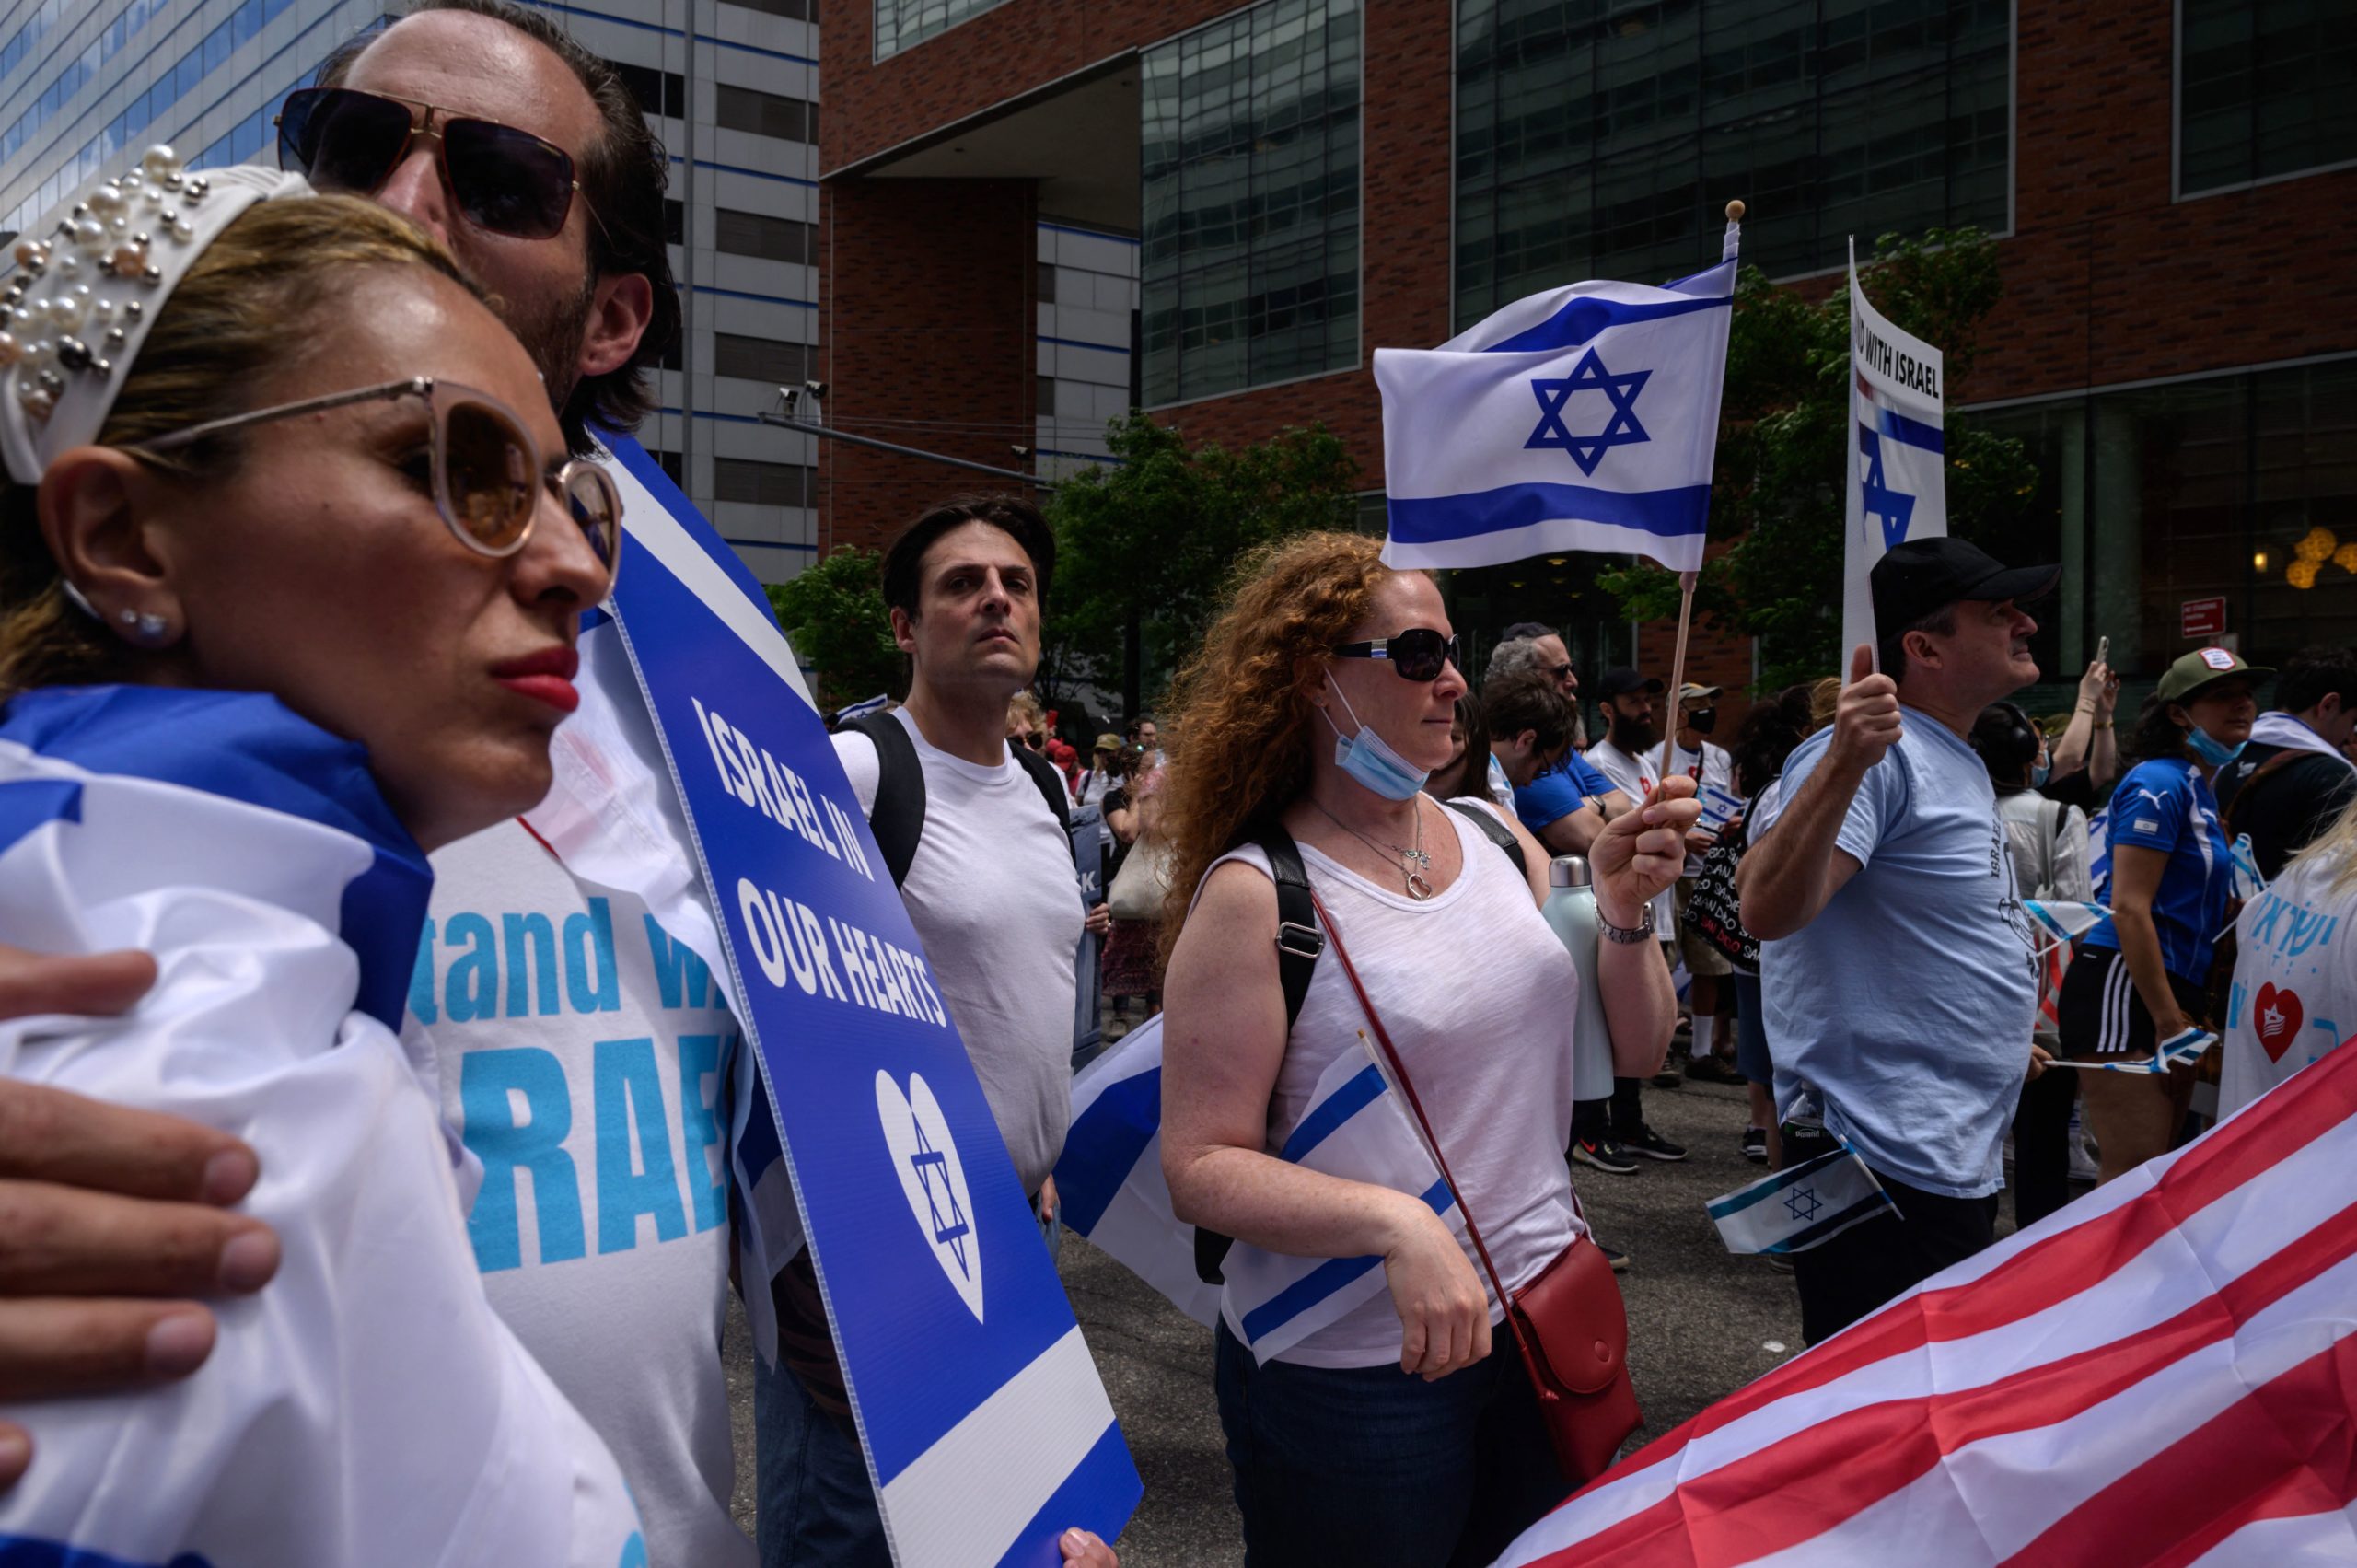 Pro-Israel demonstrators attend a rally denouncing antisemitism and antisemitic attacks, in lower Manhattan, New York on May 23, 2021. (Photo by Ed JONES / AFP) (Photo by ED JONES/AFP via Getty Images)